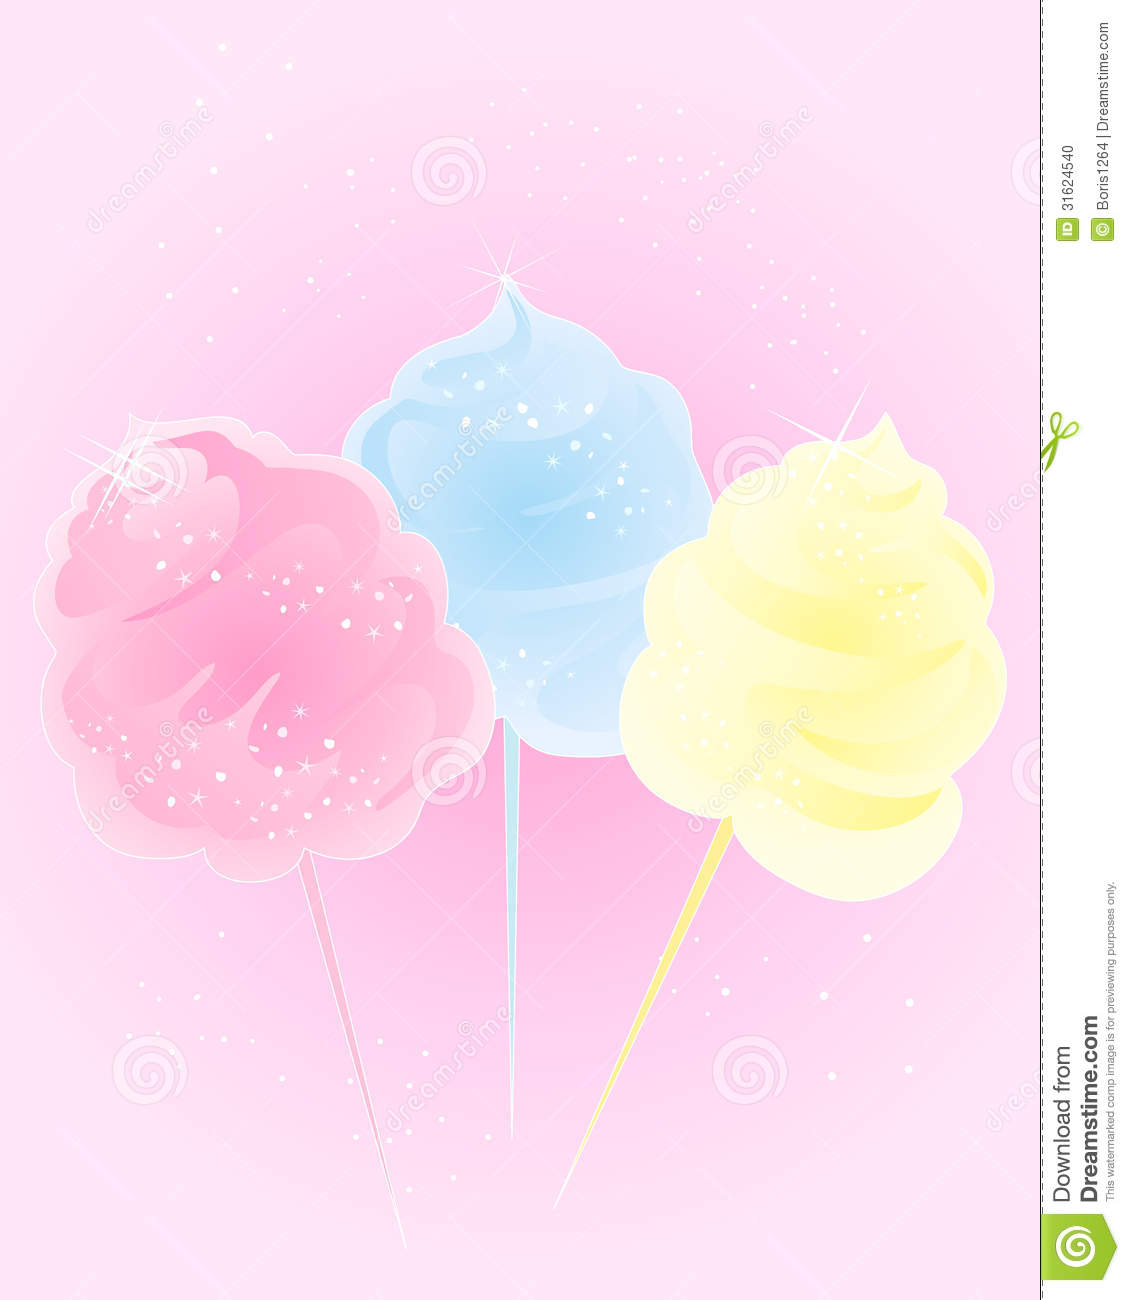 Cotton Candy Sweet Stock Photo   Image  31624540